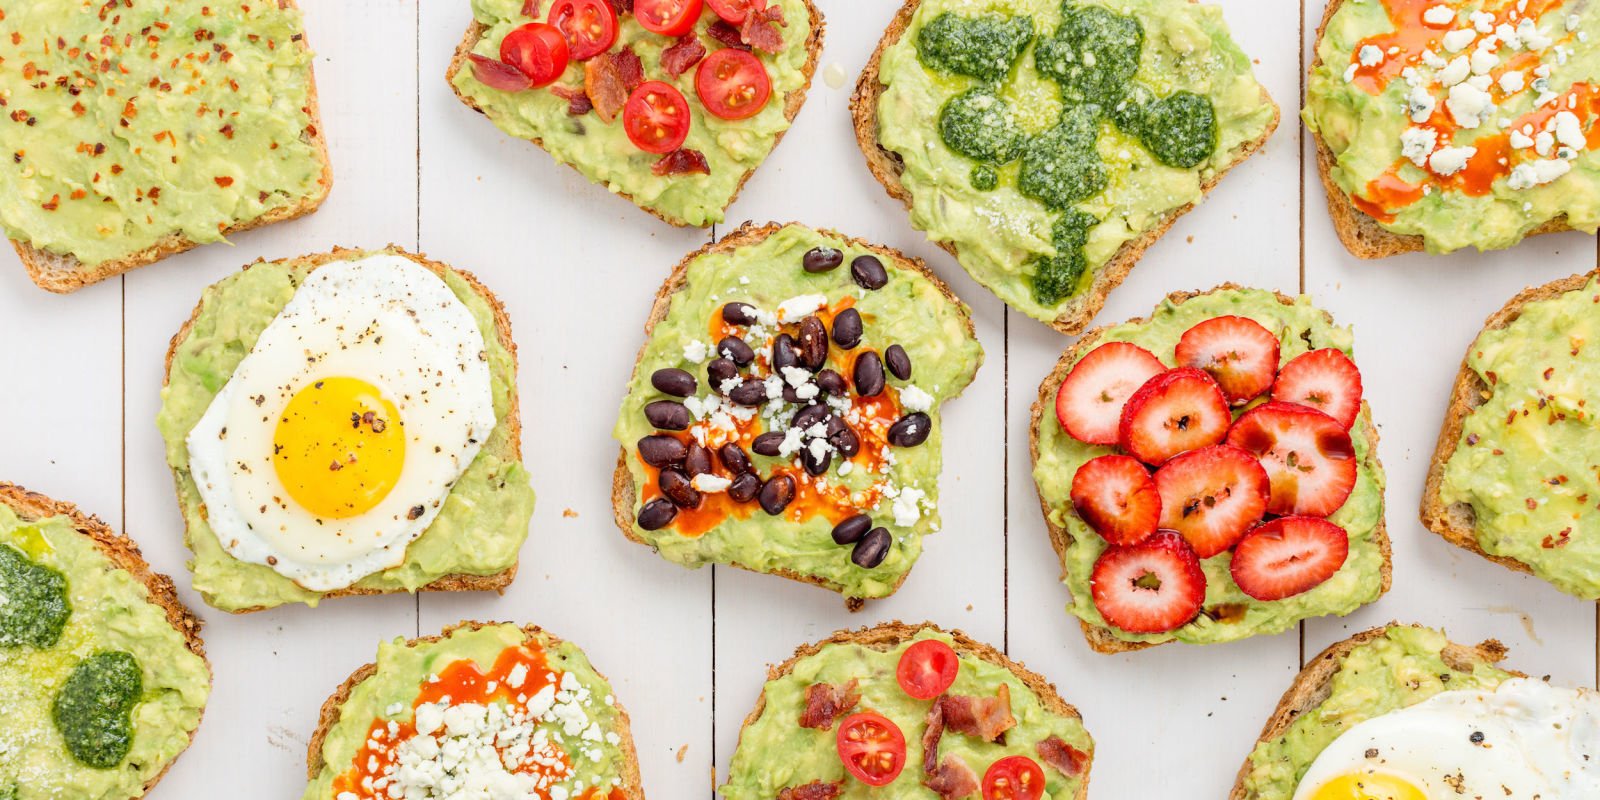 It’s The Era Of Avocado! Try these 50+ Super Easy Avocado Recipes At Home Now!